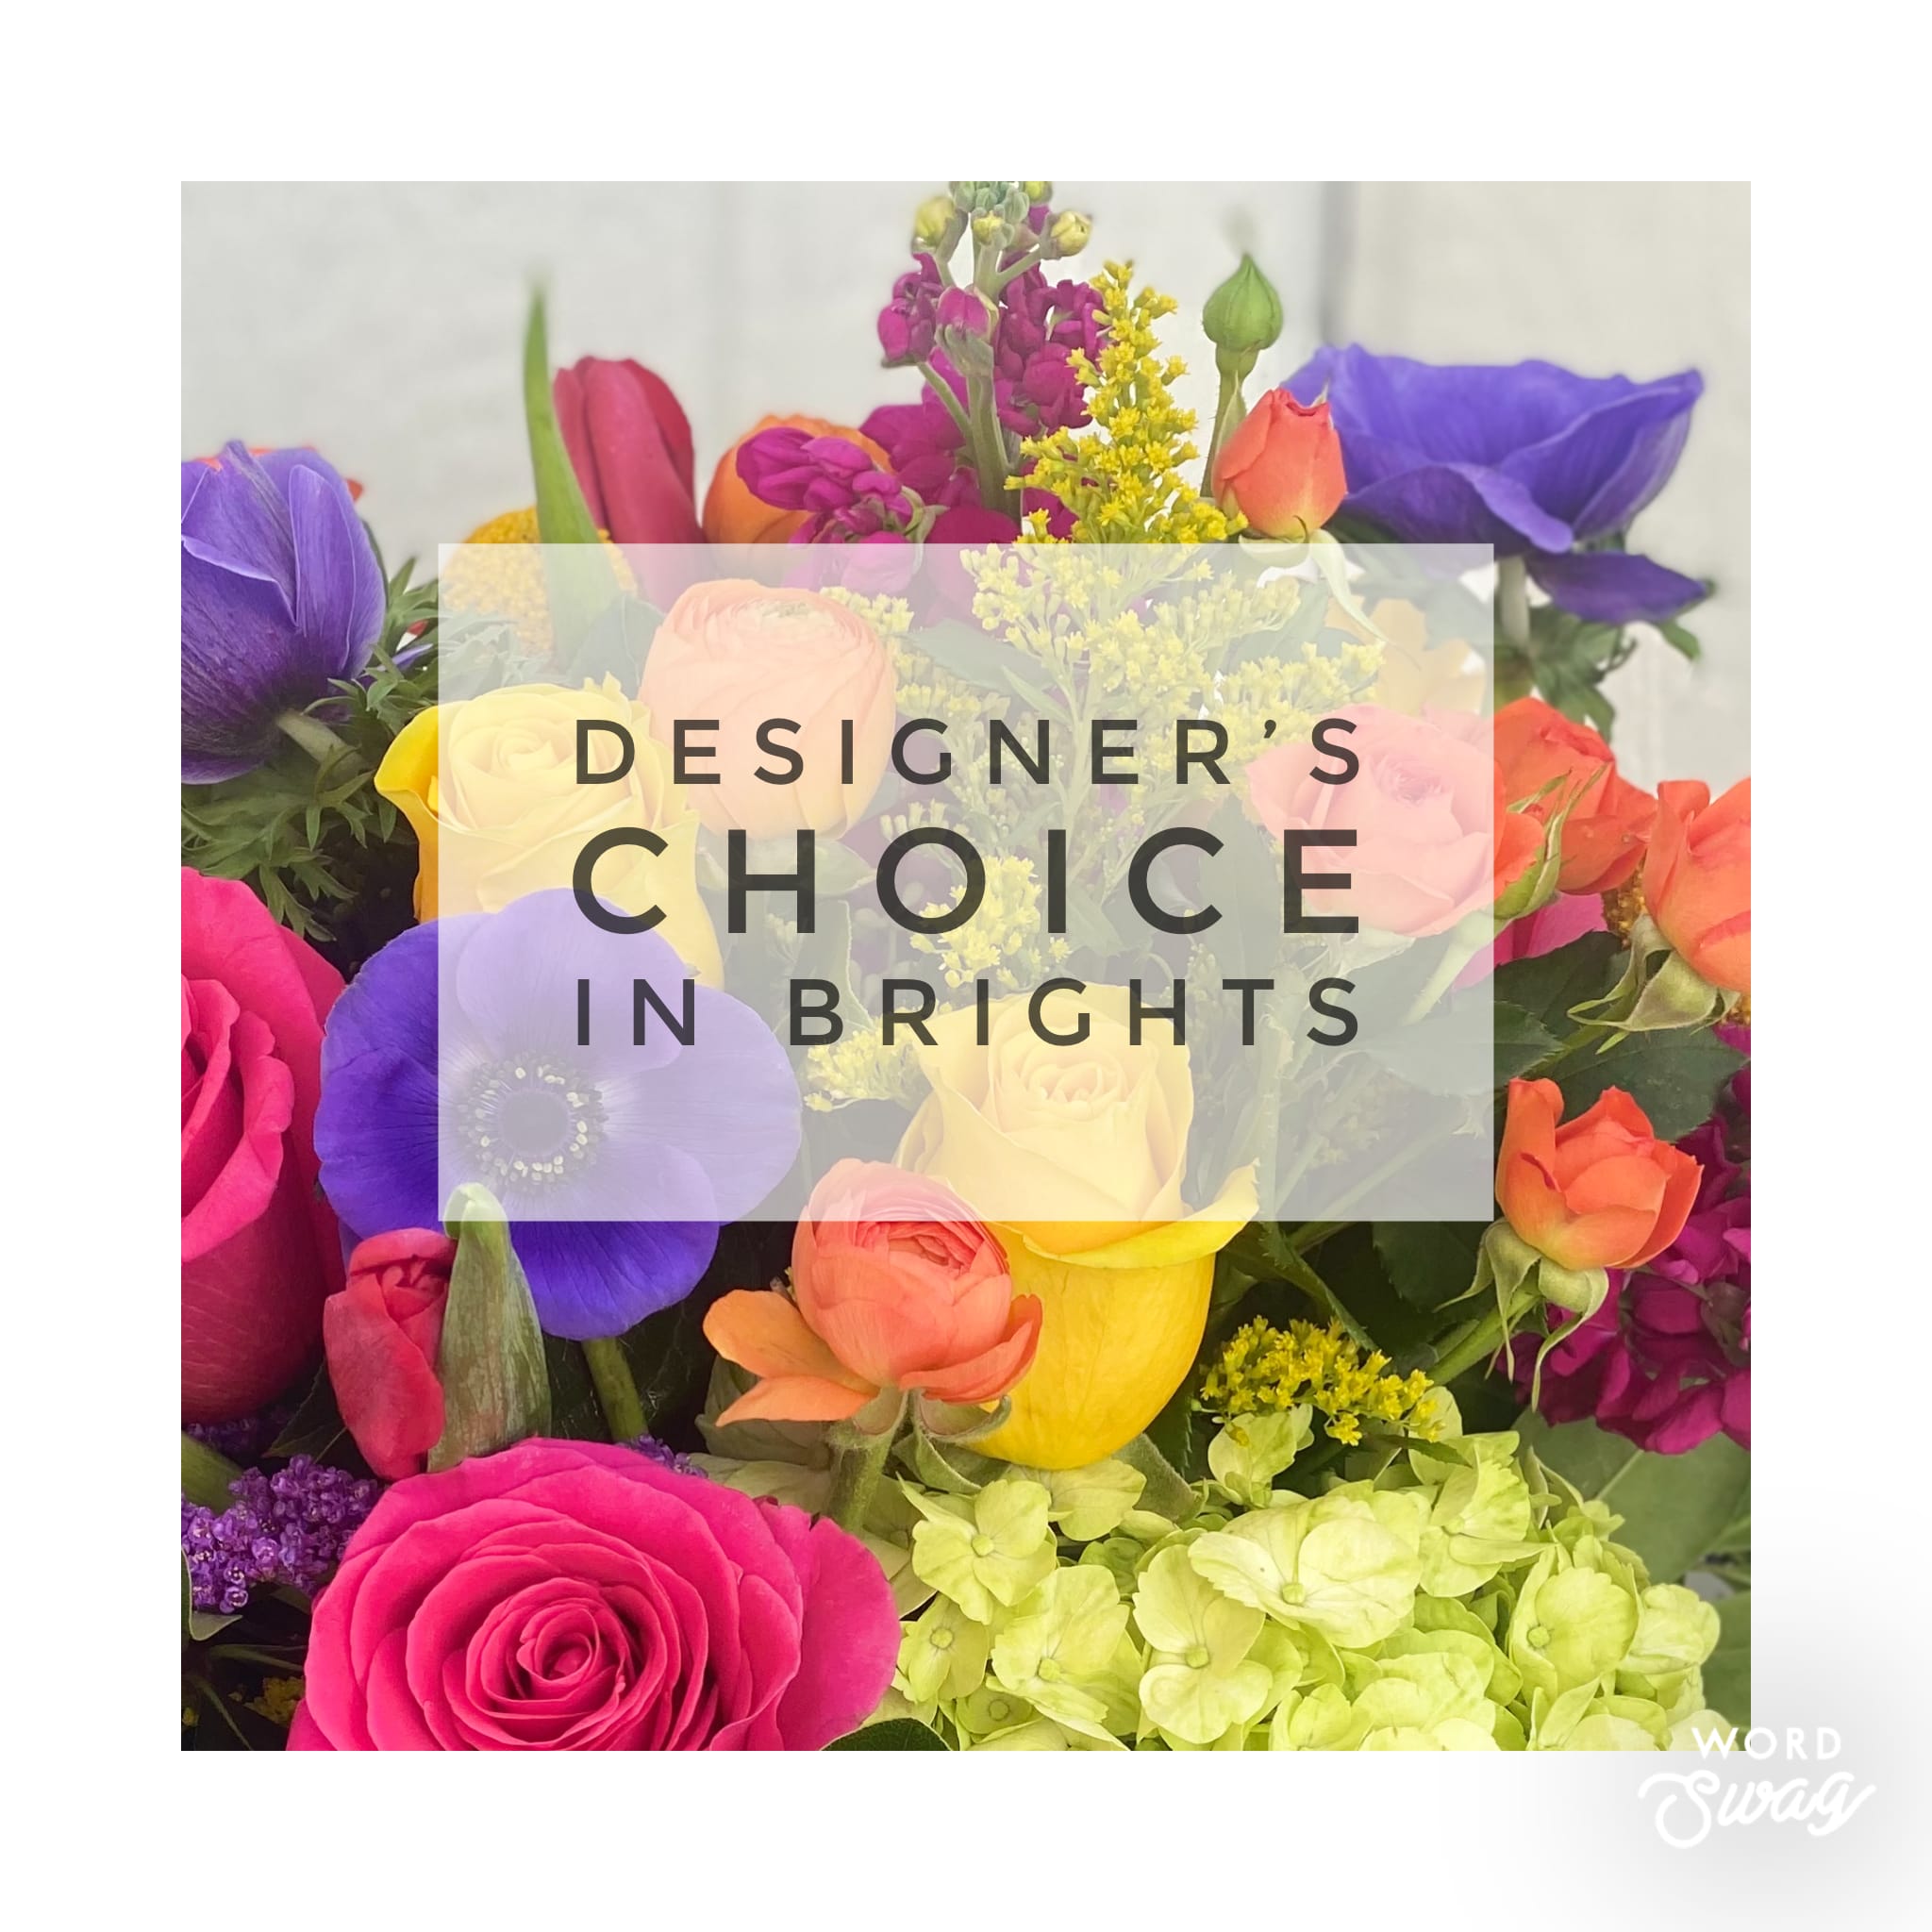 Designers Choice in Brights - Let the talented designers at Polk Street Florist create a beautiful, bright bouquet using the freshest selection of colorful premium flowers from our bountiful coolers. Our most popular range is $100-$175. Comes arranged in a vase. 